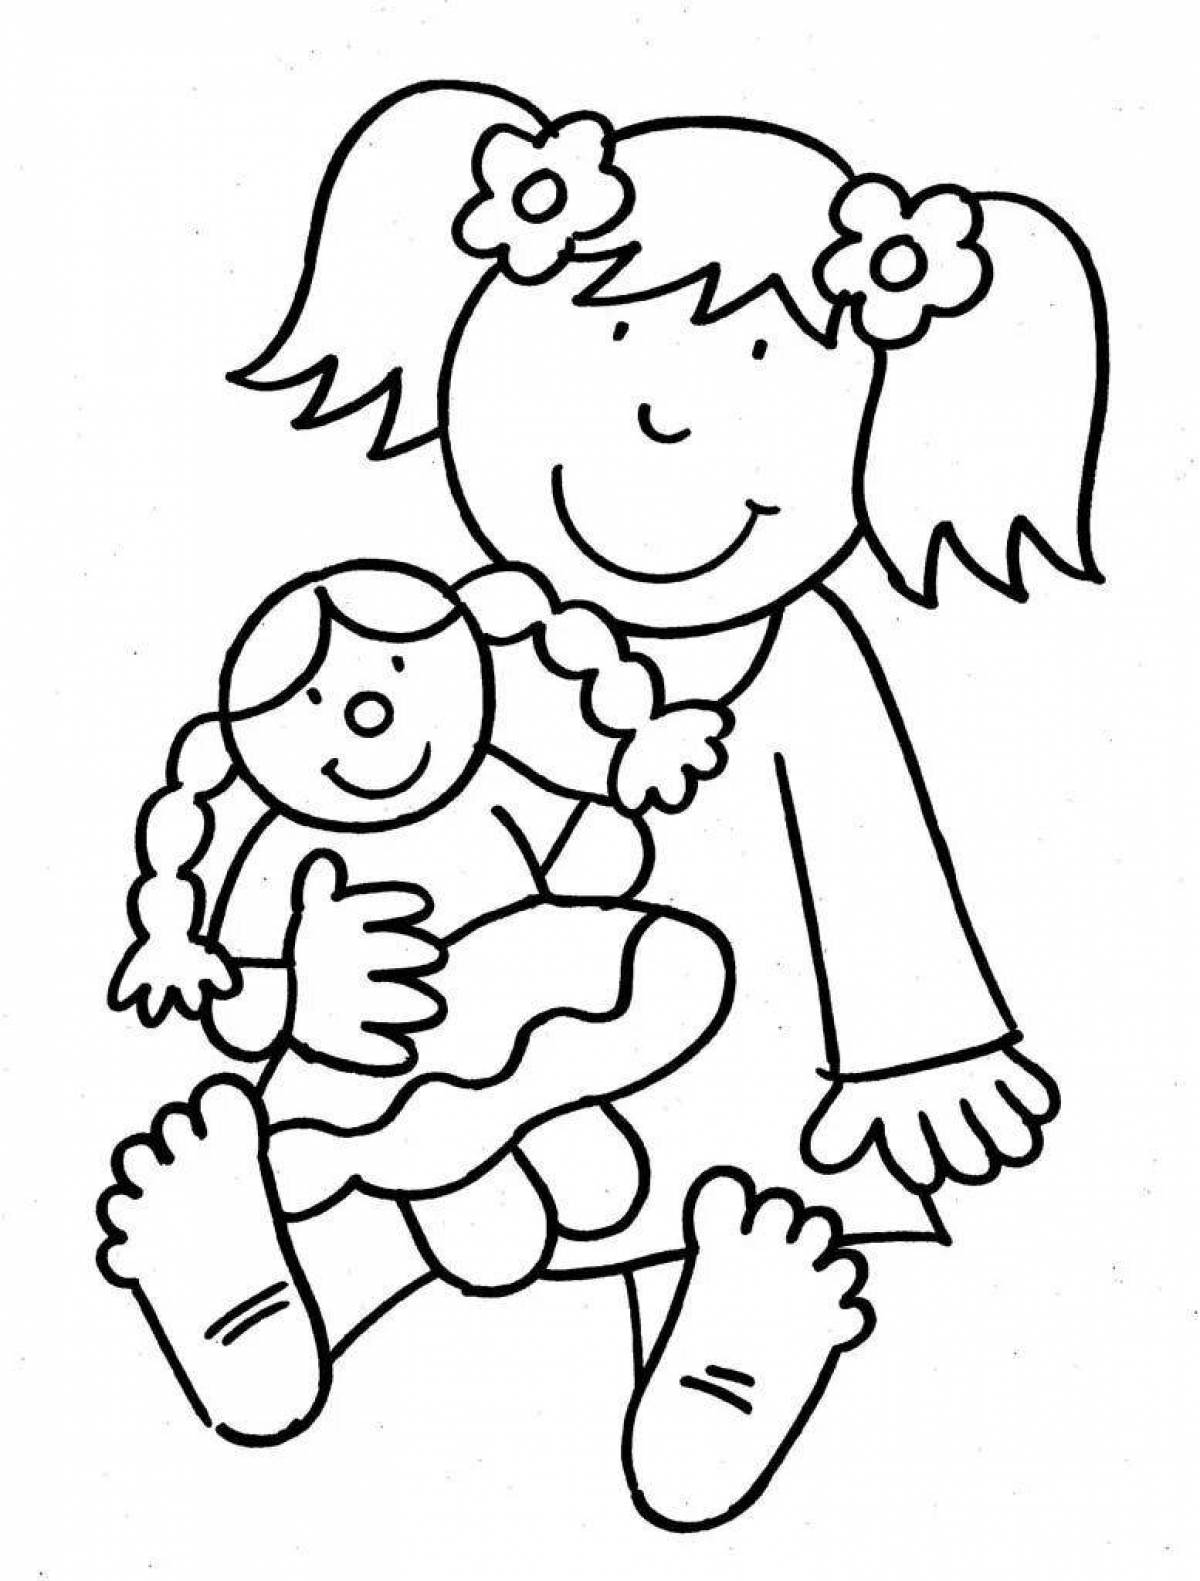 Coloring book gorgeous masha doll